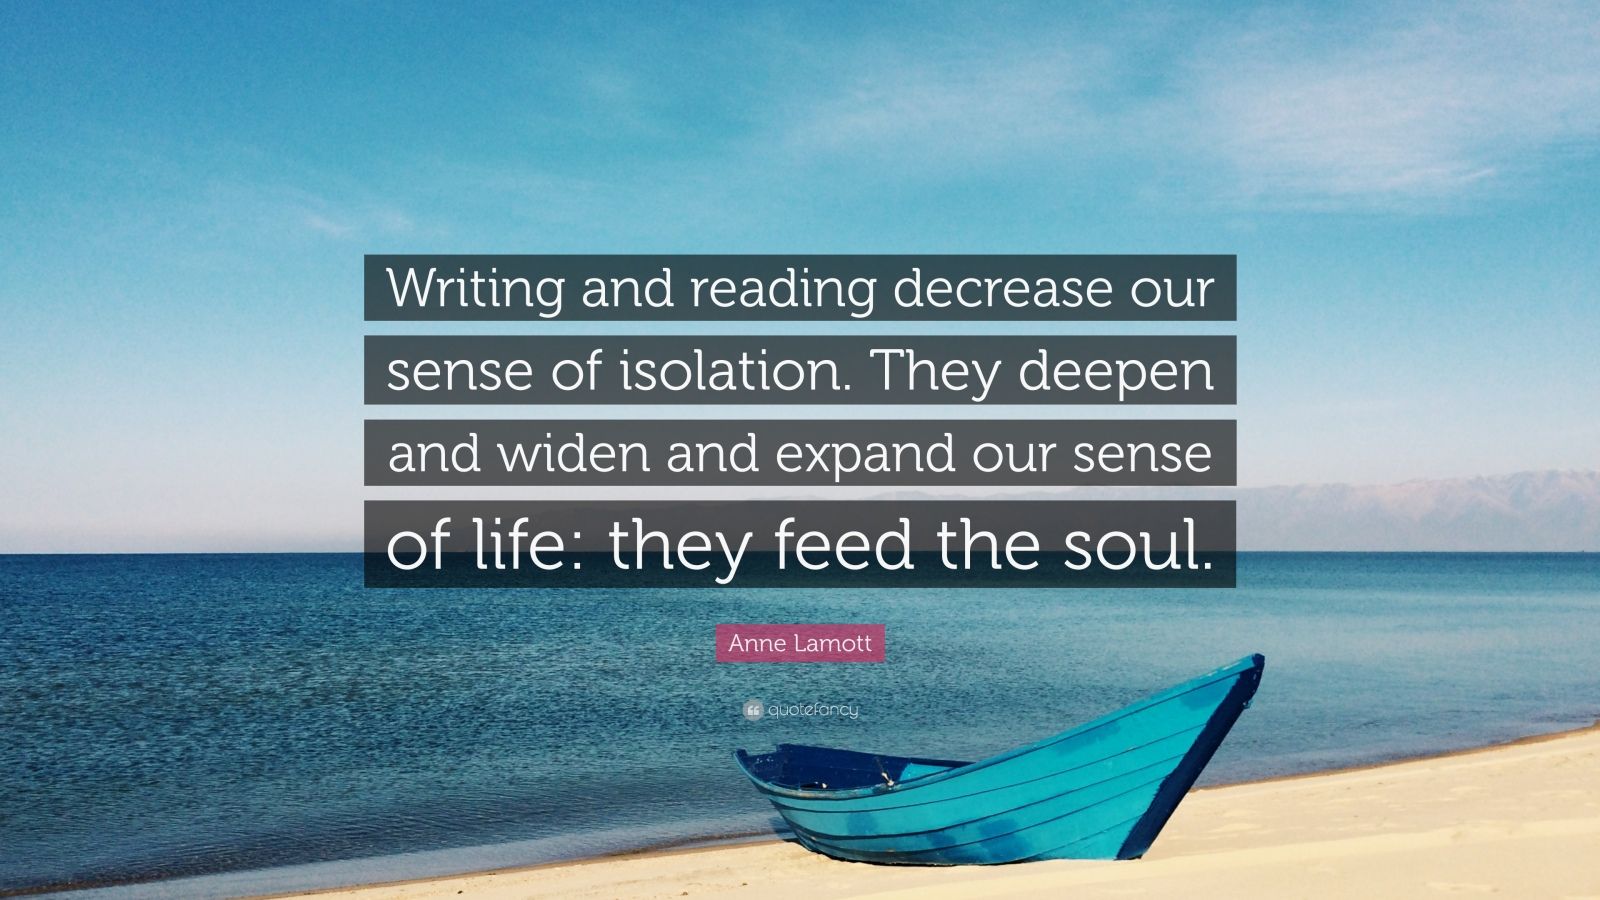 anne lamott quote: "writing and reading decrease our sense of